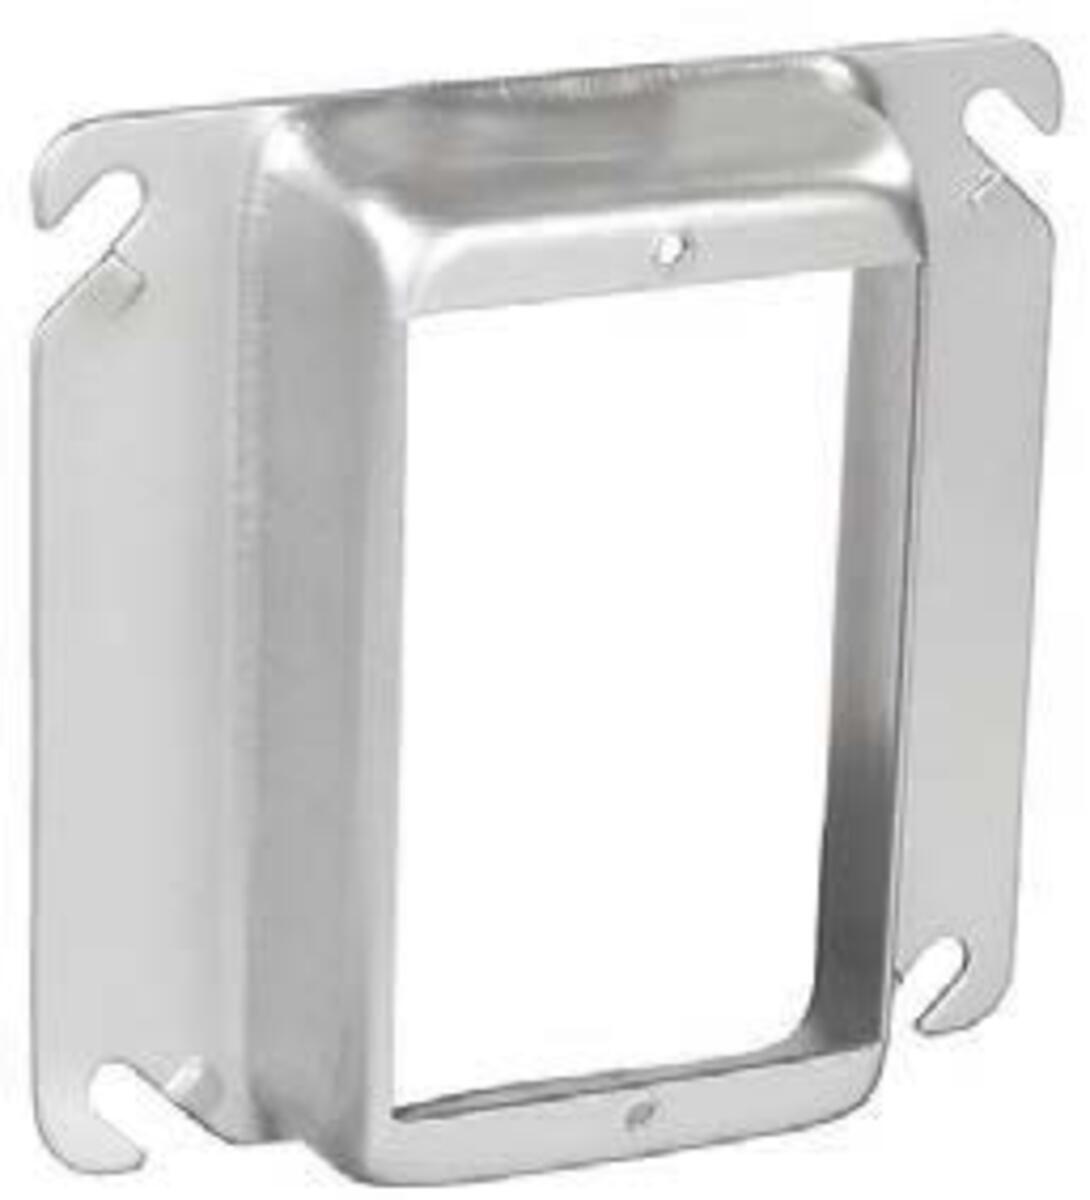 Mud Ring 1/4" Raised Cover 4" Square Box 1 Gang 1 Device Ring 